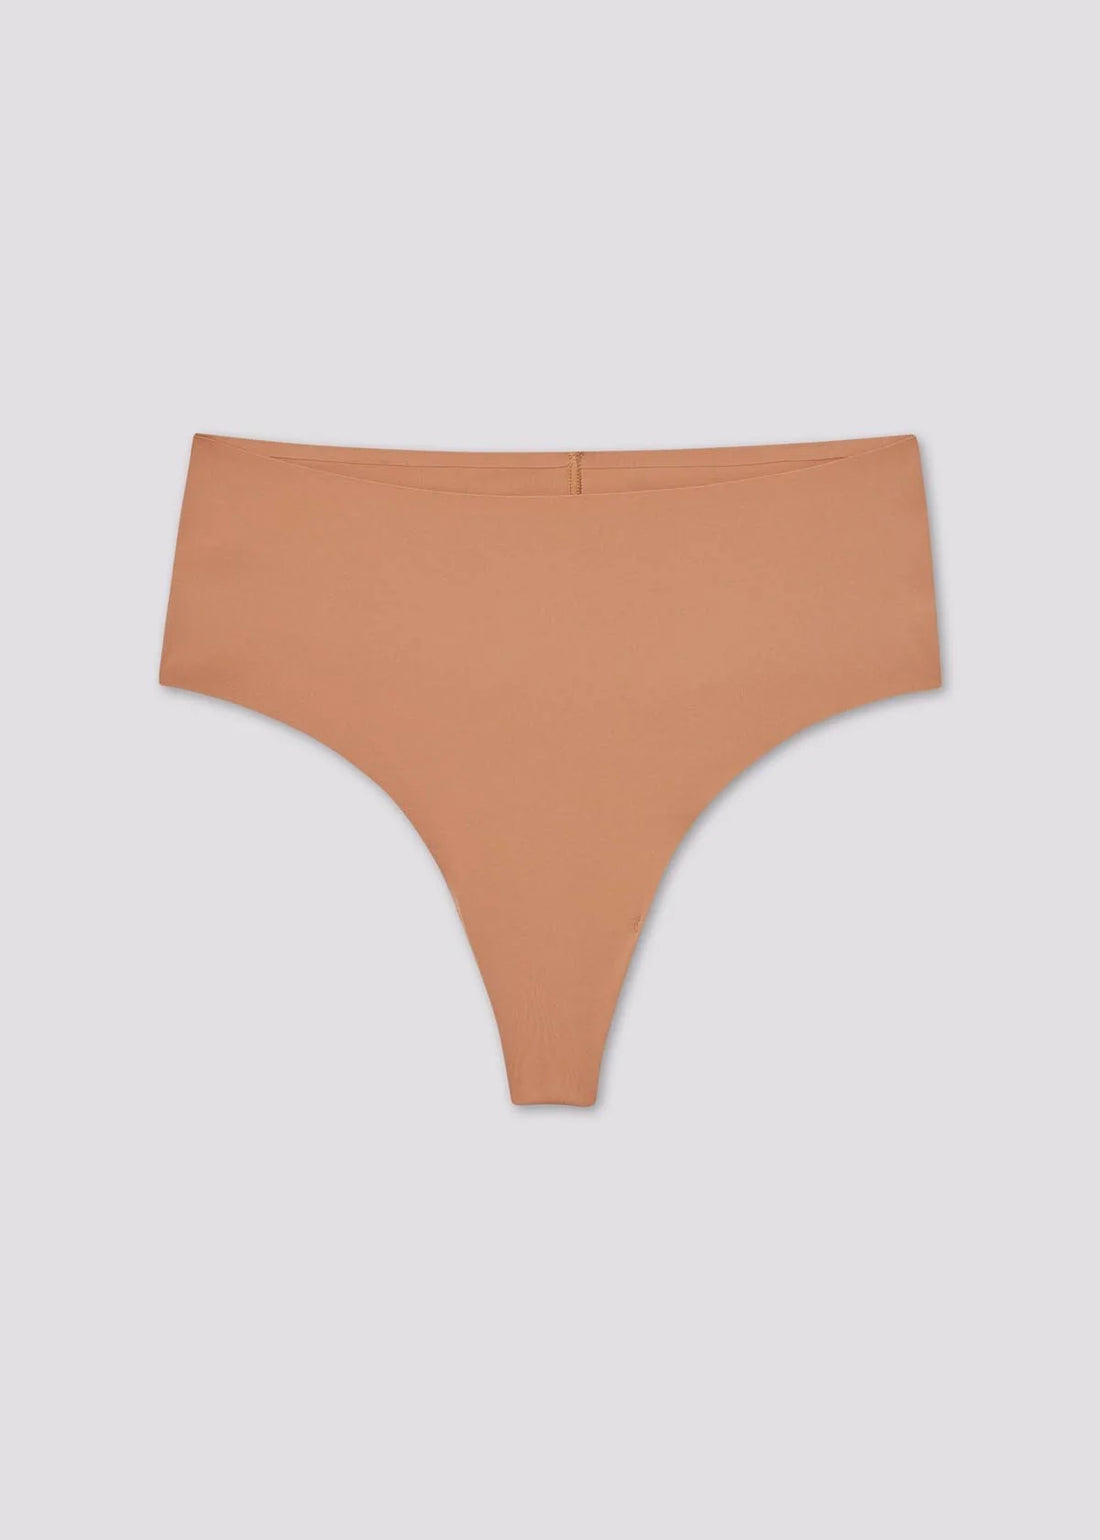 Girlfriend Collective High-Rise Thong in Toast